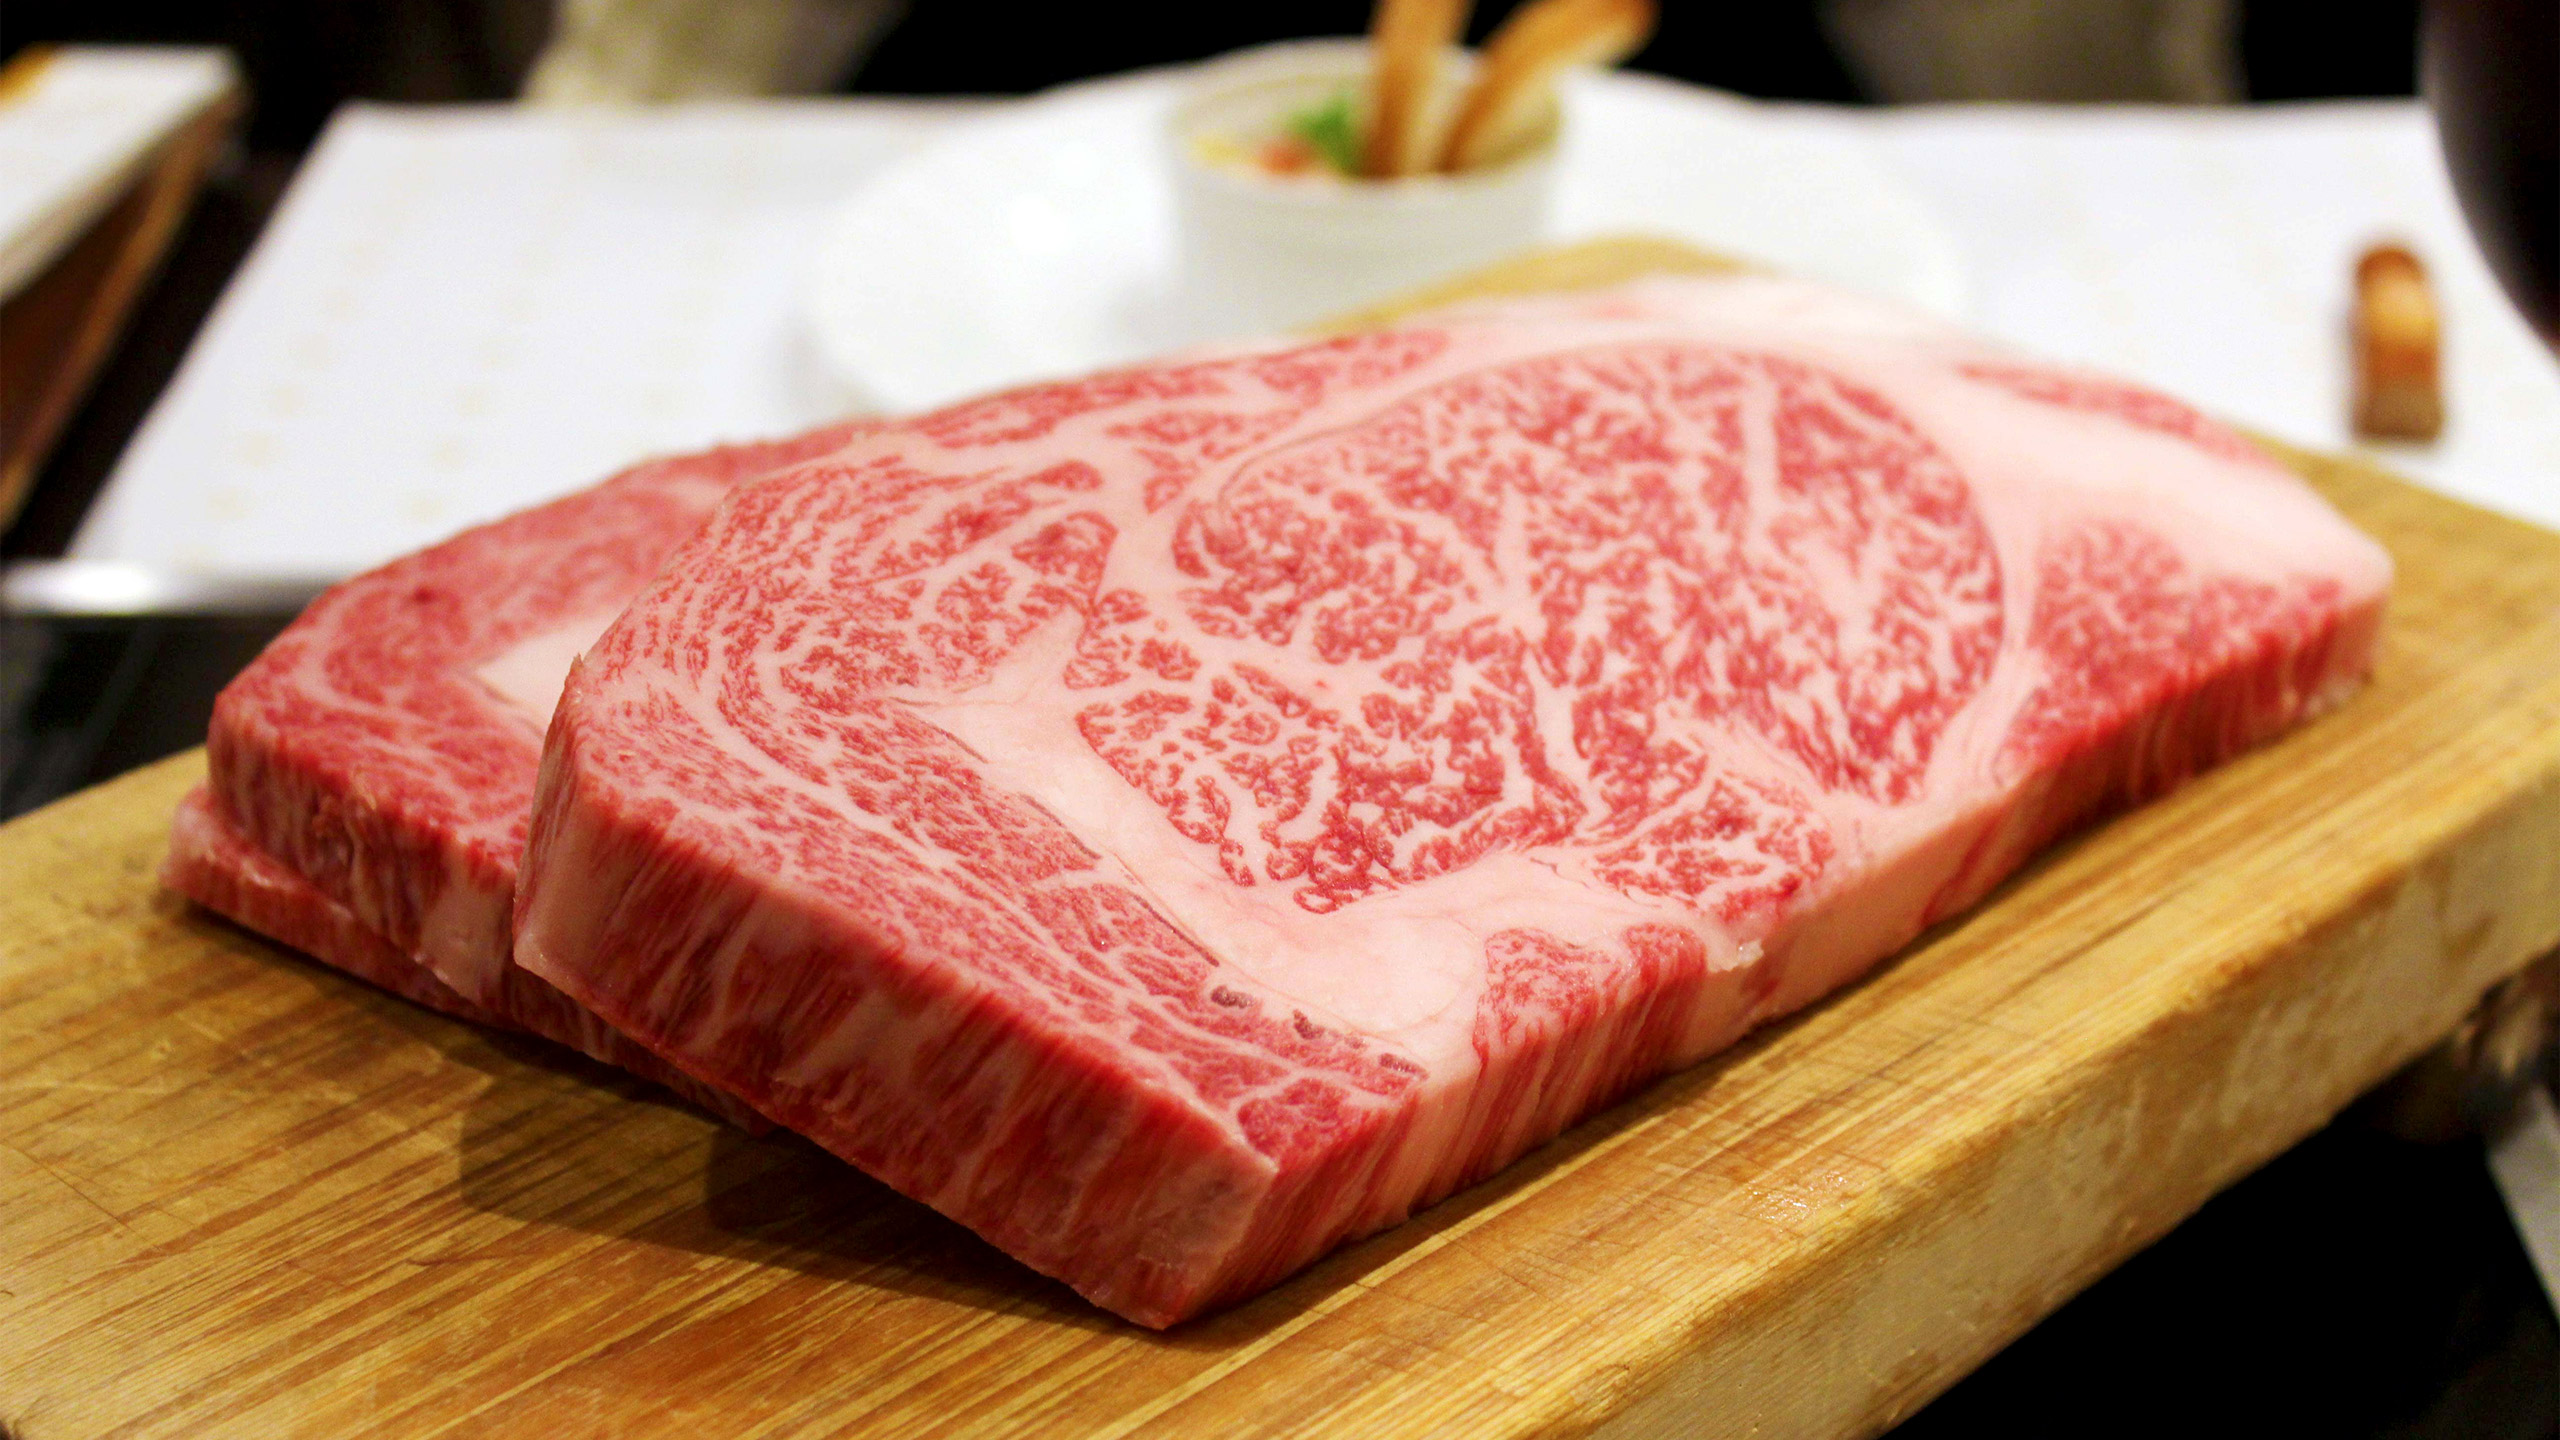 While kobe is a type of wagyu beef from the tajima strain of the japanese b...